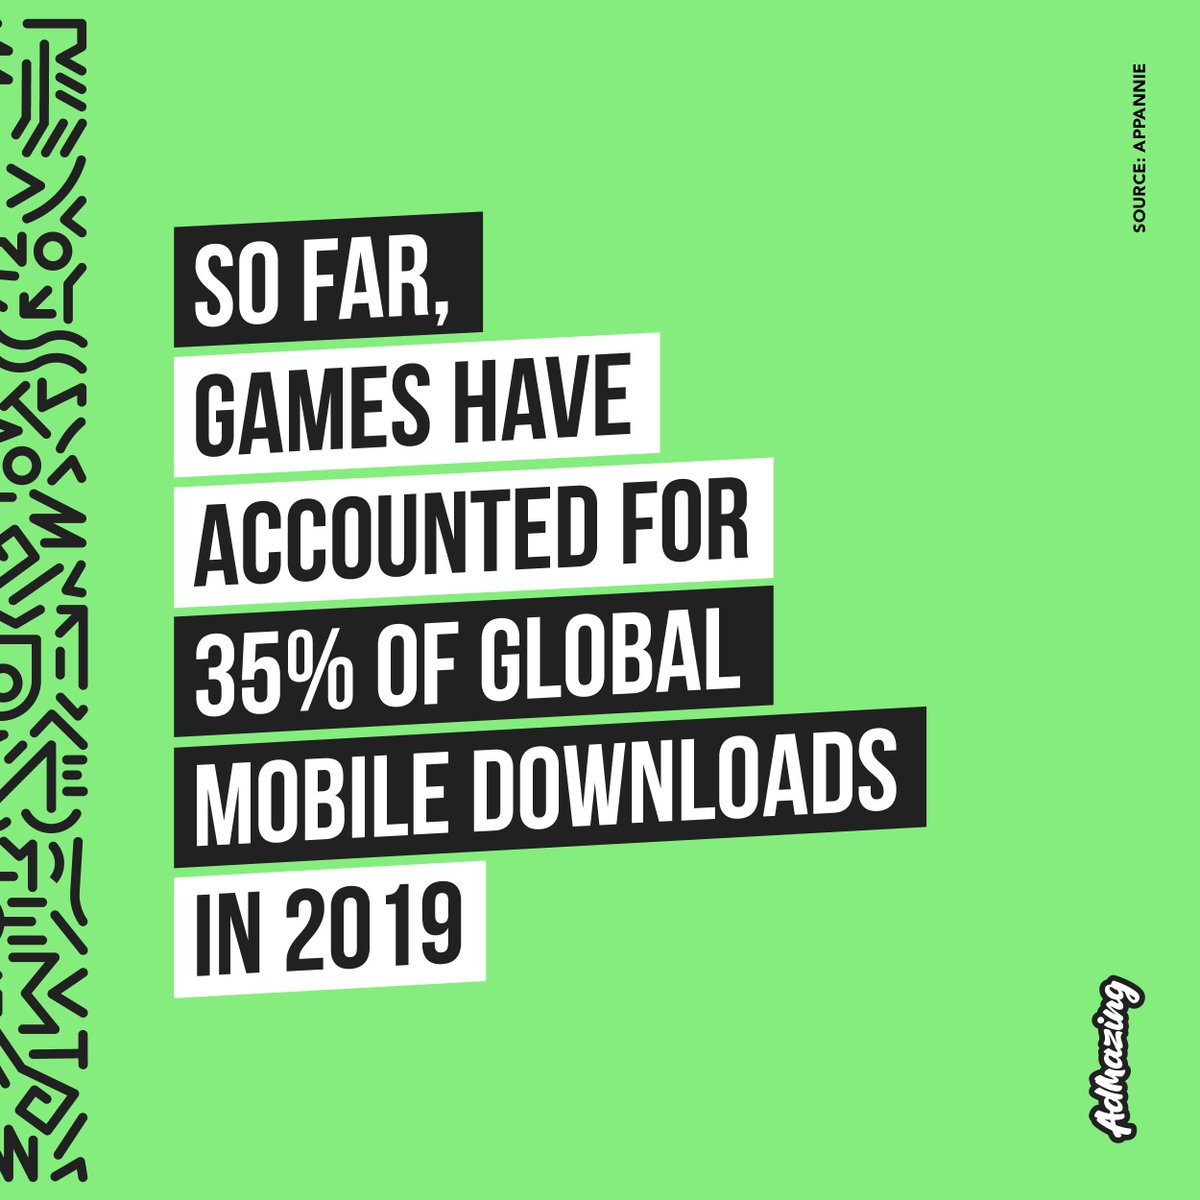 More downloads + Admazing services = $$$

#mobilephonegames #newmobilegames #mobilesgames #gamesmobile #bestmobilegames #mobiledownloads #follow #mobileadvertising #videoadvertising #socialmediaads